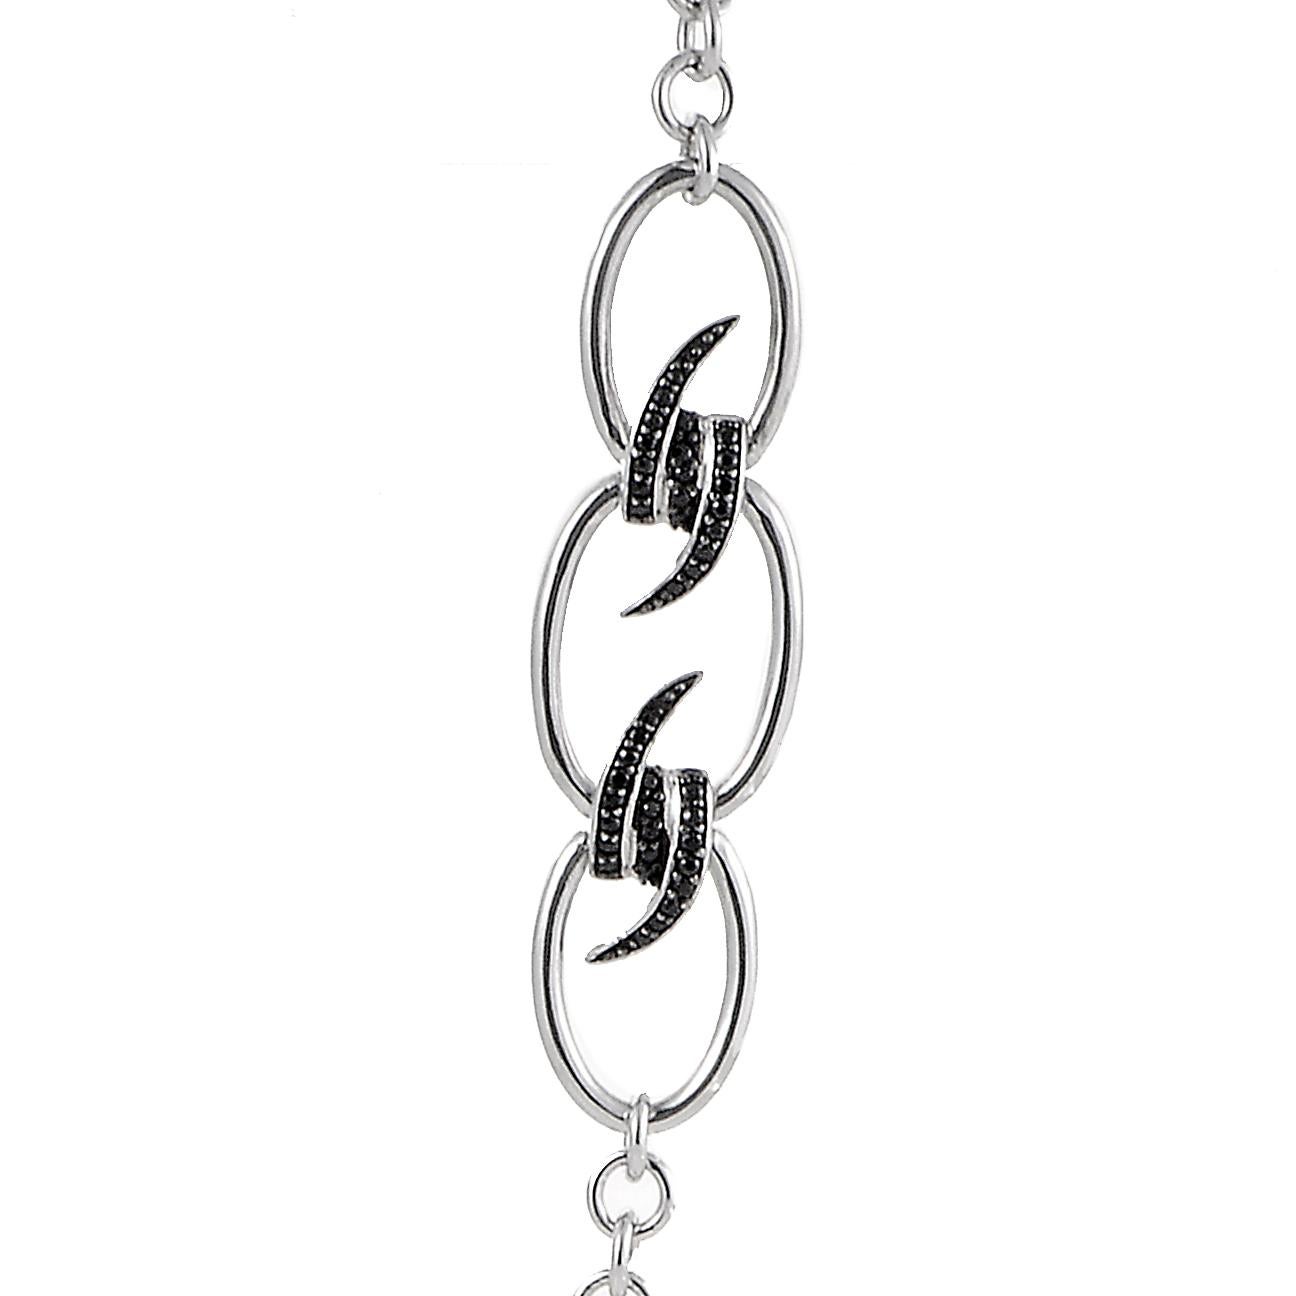 This Stephen Webster necklace from the ingenious Forget Me Knot collection is made of white rhodium-plated silver and boasts offbeat decorative segments set with 1.55 carats of striking black sapphires.